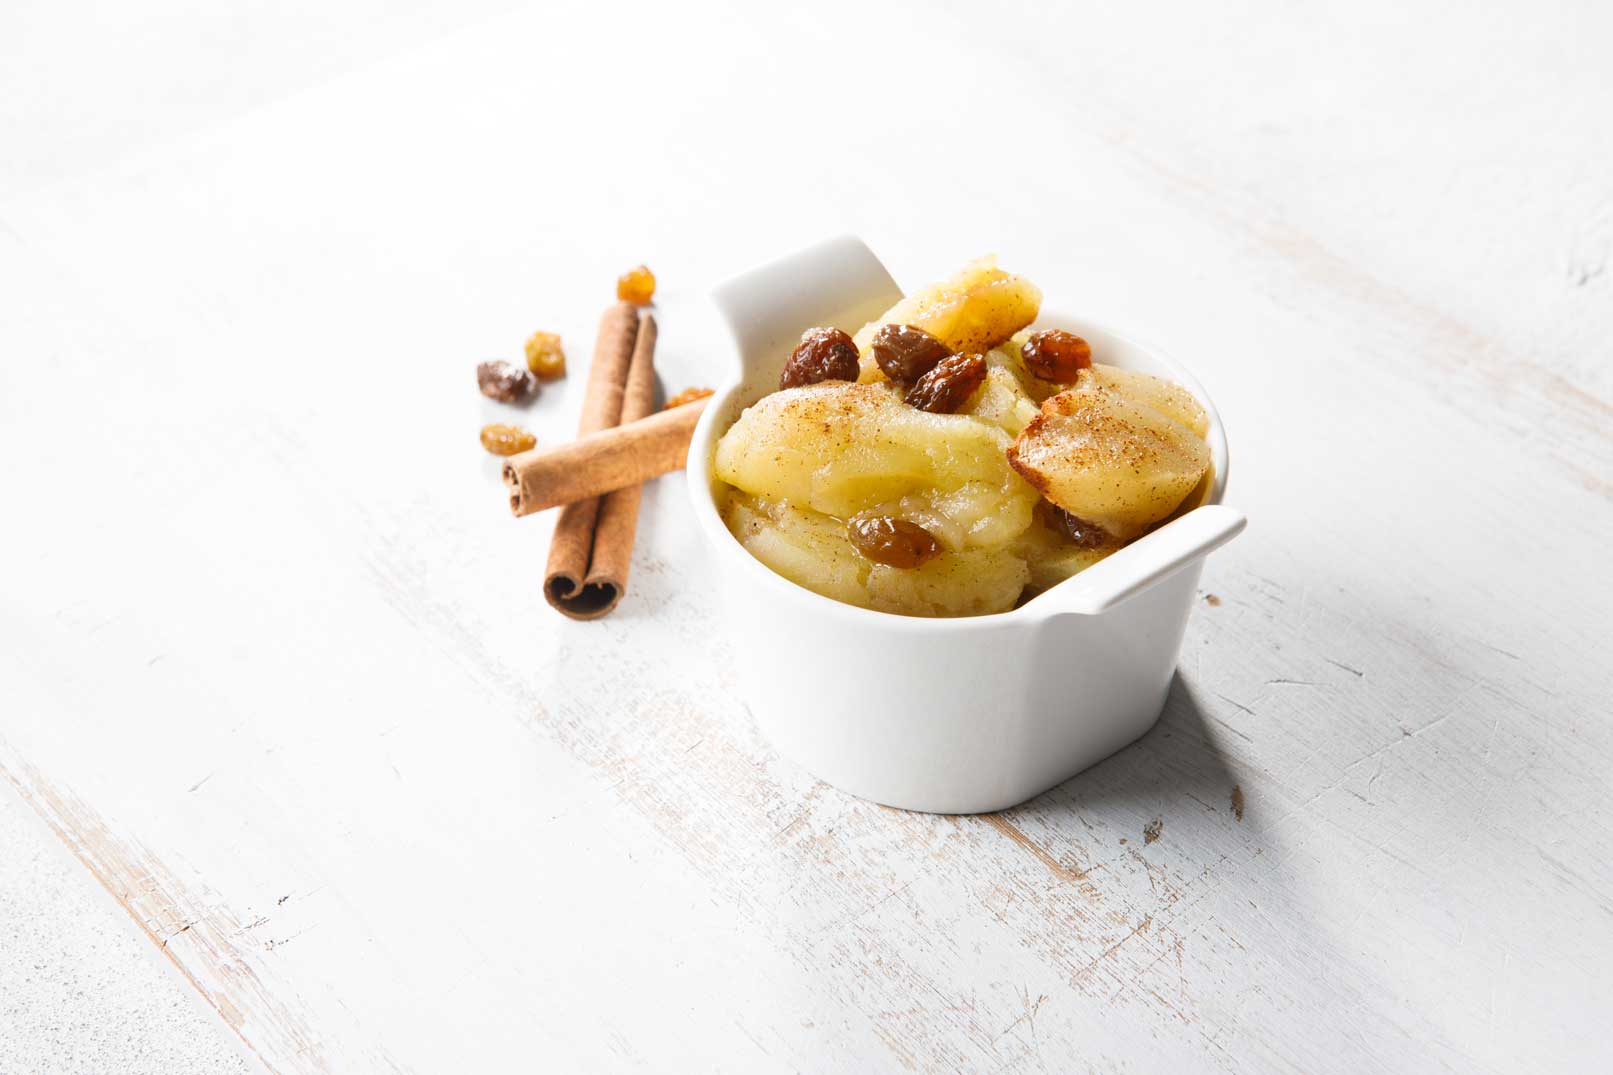 Image of stewed apples topped with sultanas in a white ceramic bowl with two cinnamon sticks on the side.